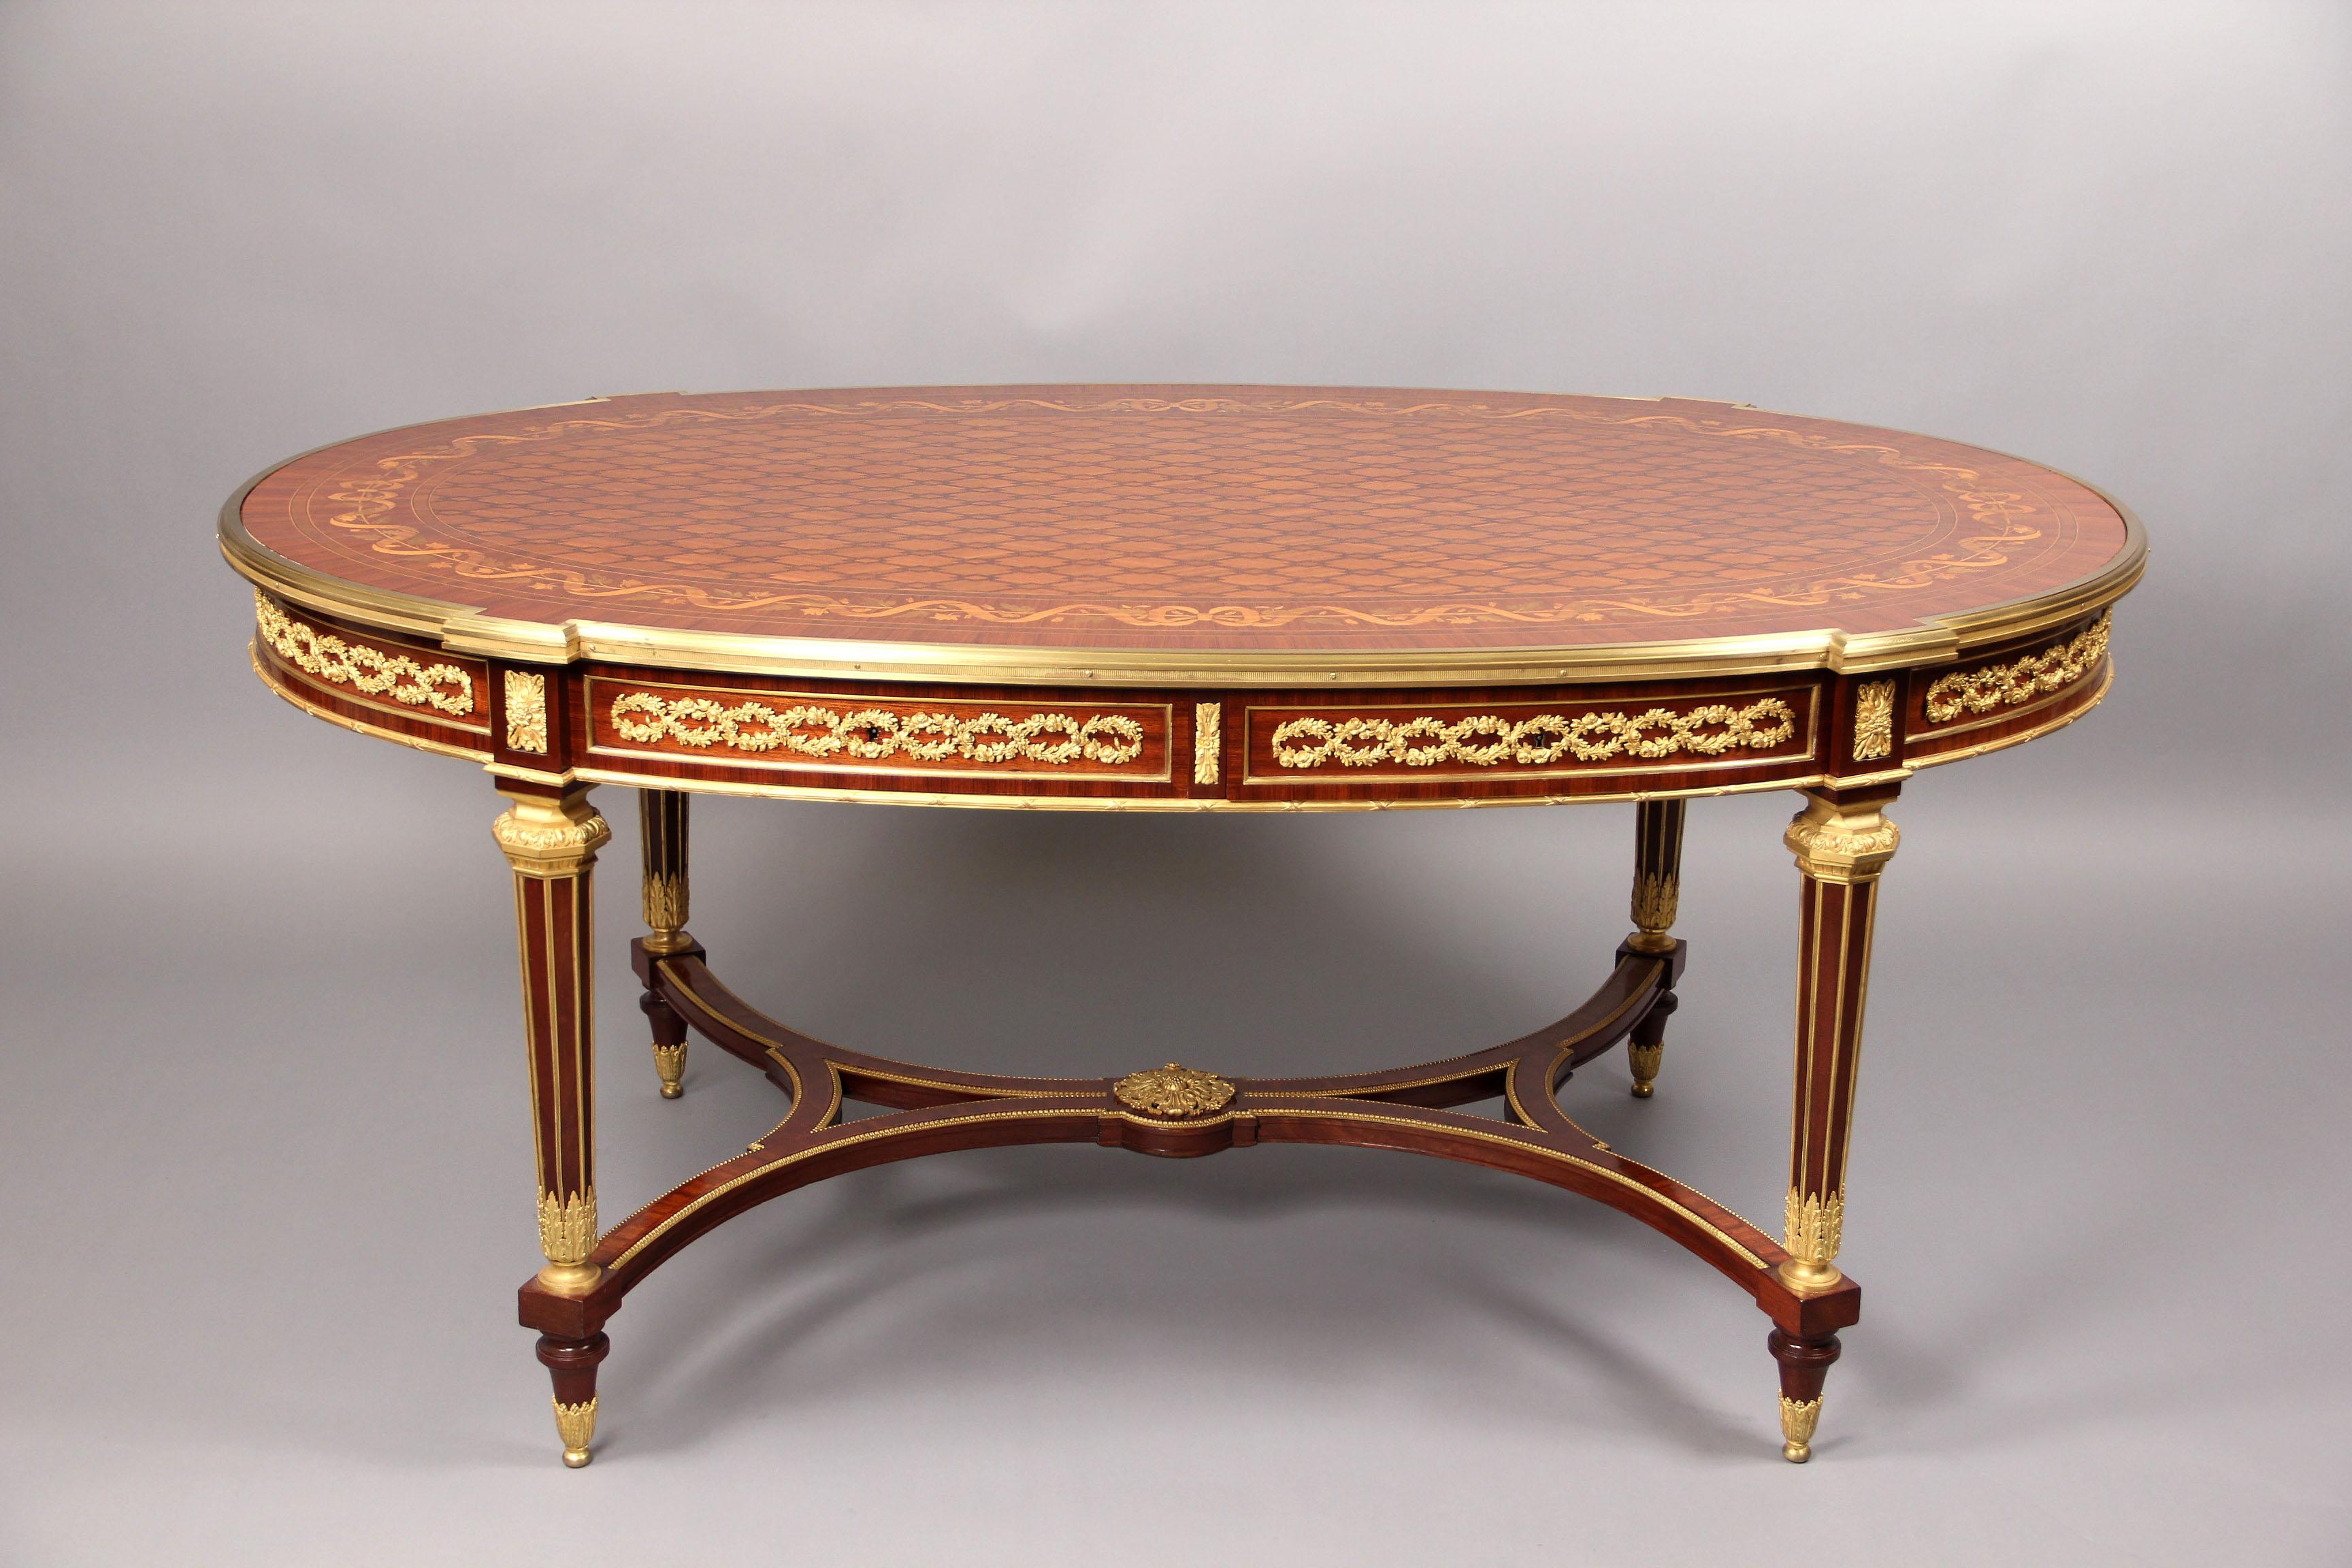 A rare and fantastic quality late 19th century Louis XVI style gilt bronze mounted inlaid marquetry and parquetry center table By Franc¸ois Linke.

Franc¸ois Linke.

The crossbanded oval top with central parquetry panel surrounded by floral and